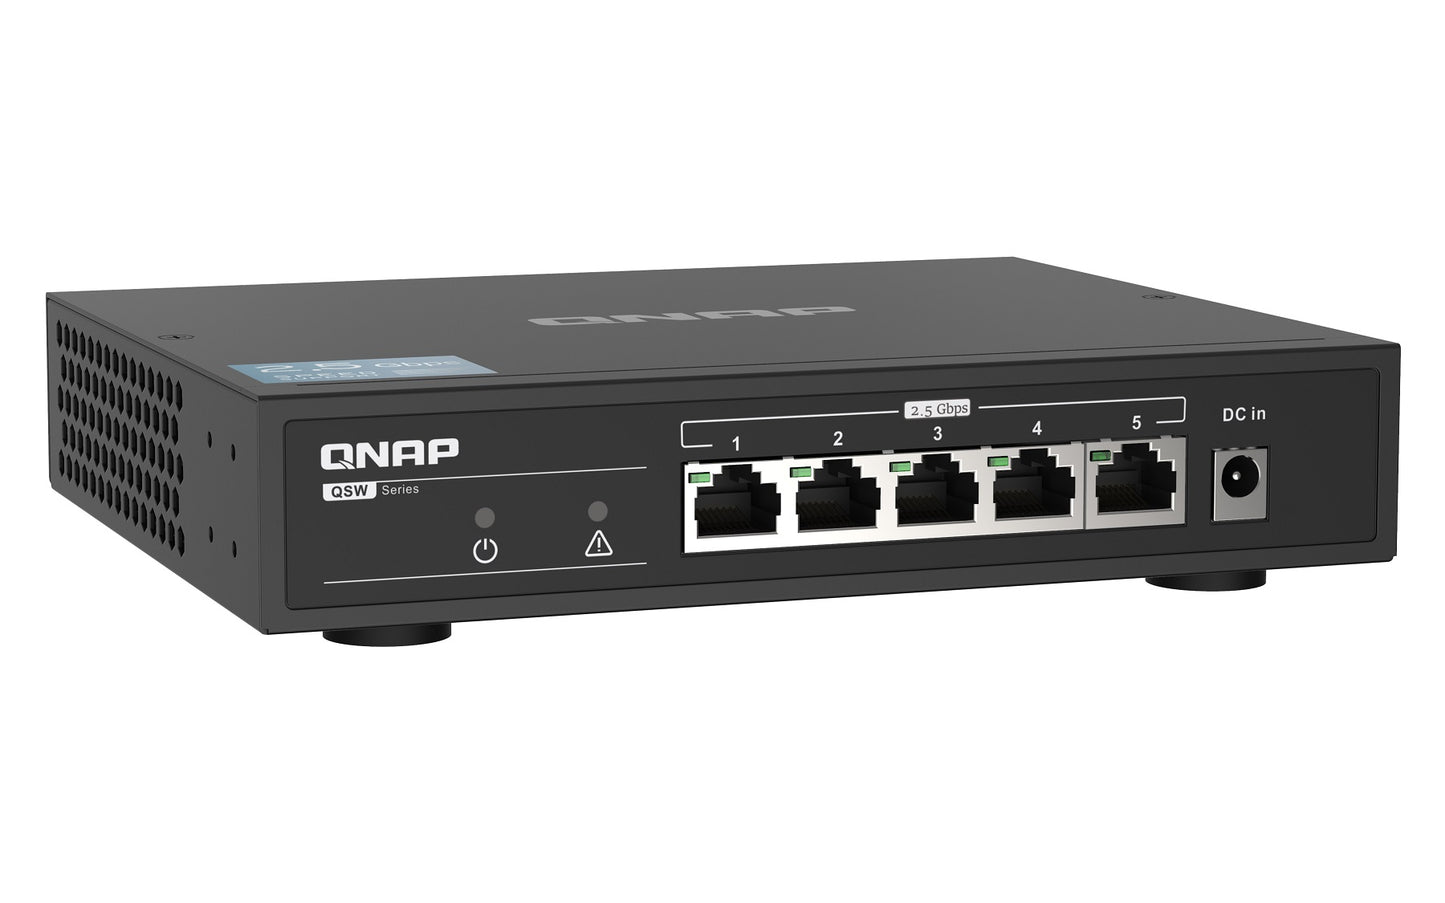 QNAP QSW-1105-5T 5-Port Ethernet Switch 2.5GbE